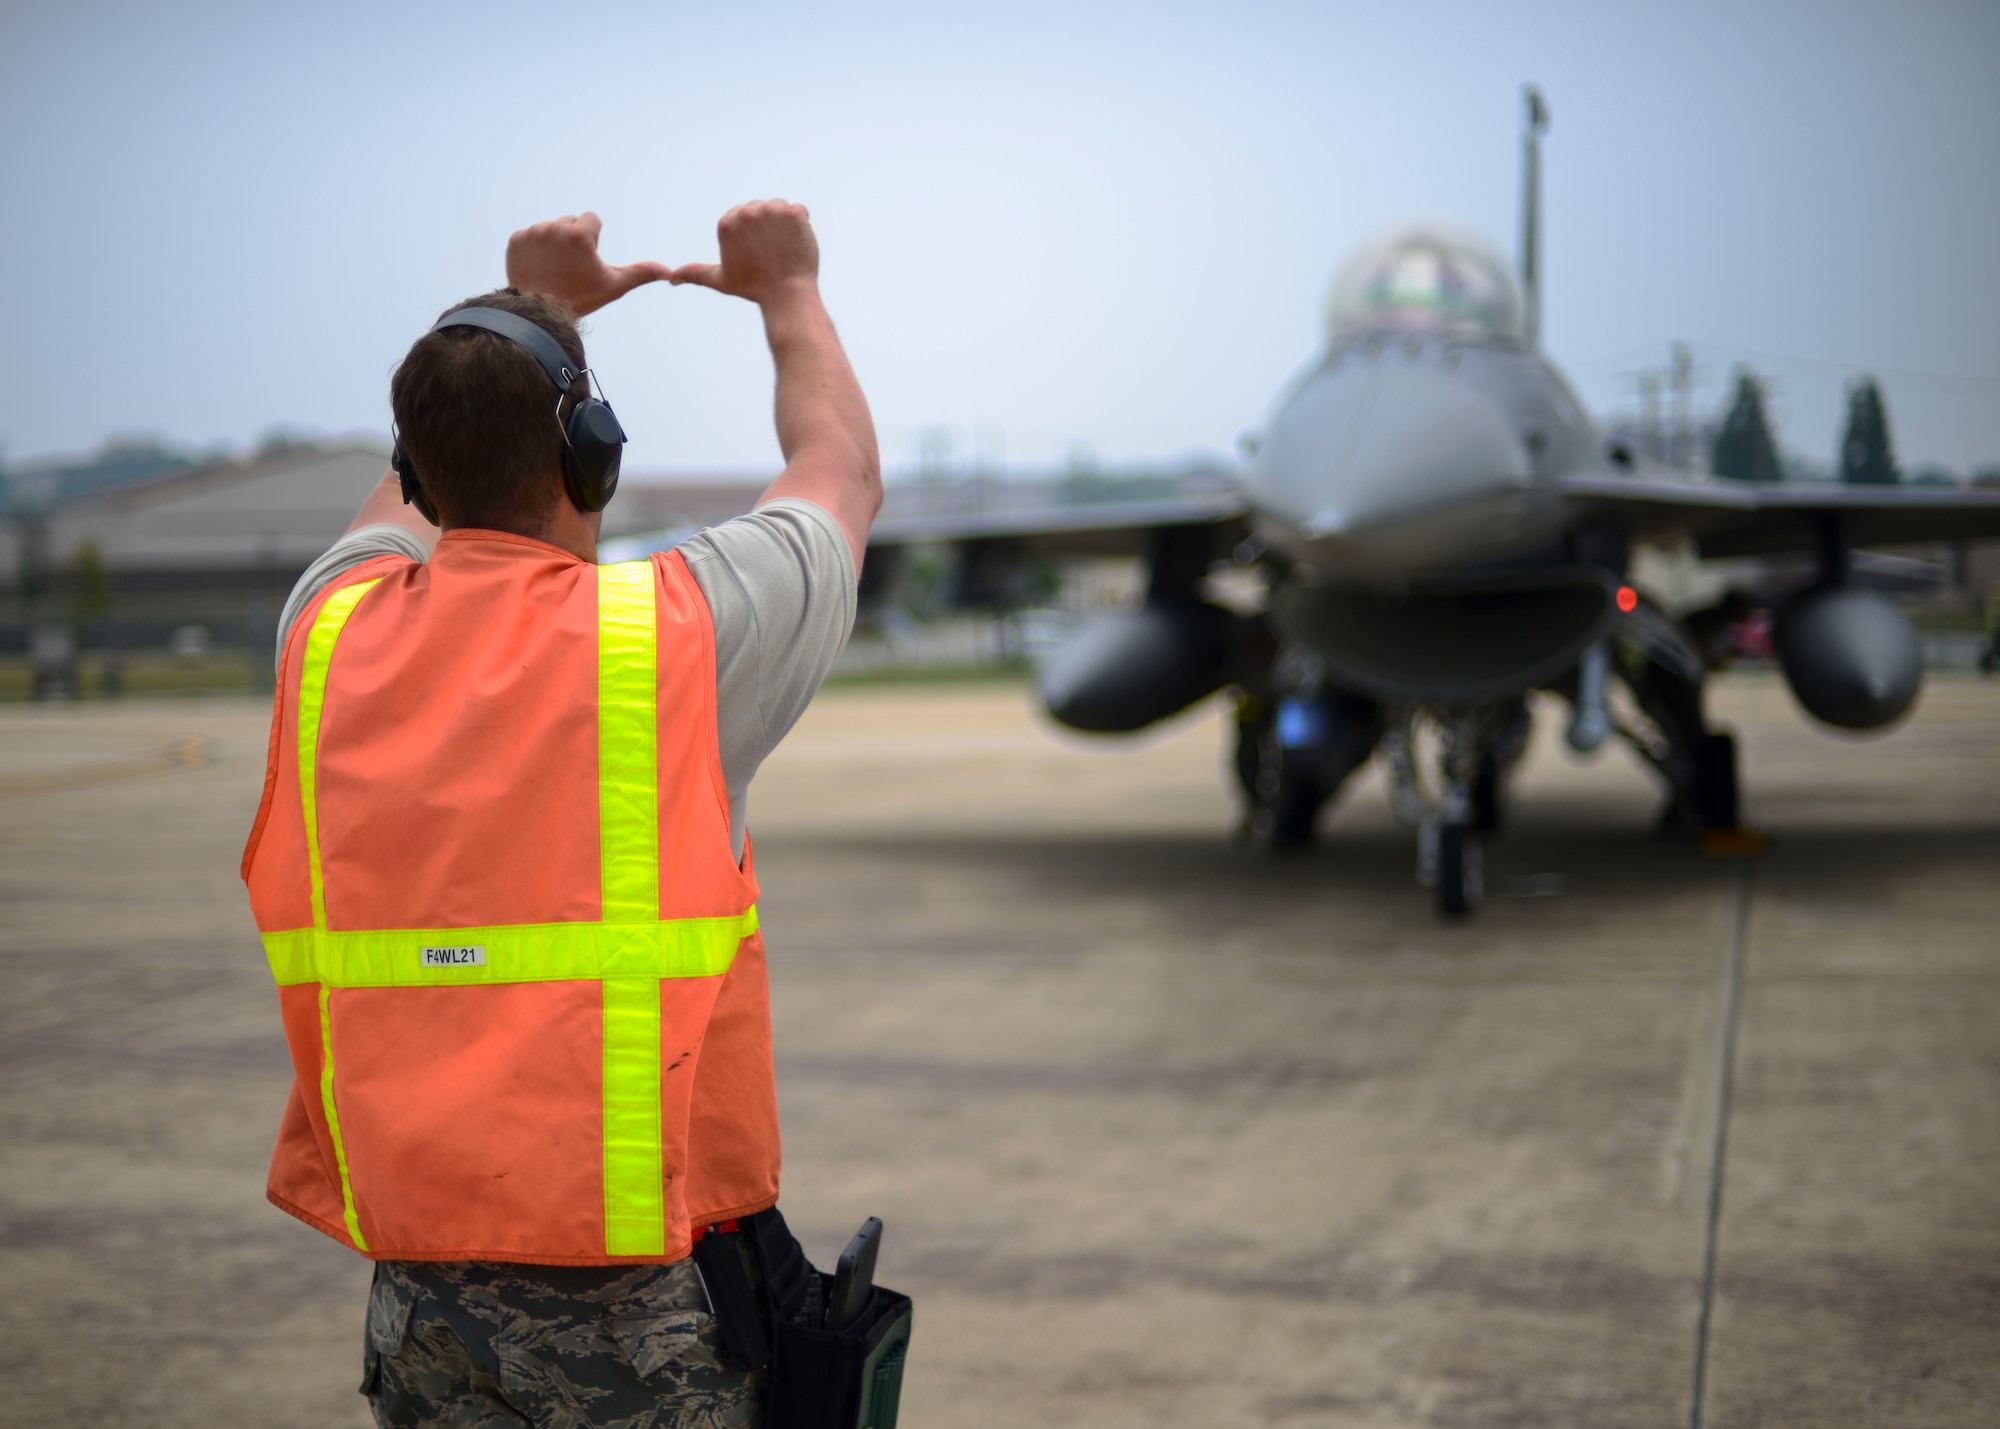 Tech. Sgt. Adam Skadsberg, 148th Aircraft Maintenance Unit weapons one-man, signals to an F-16 Fighting Falcon pilot, June 21, 2016, at Osan Air Base, Republic of Korea. Skadsberg was part of a three-man crew performing the inspection, and was responsible for communicating with the pilots while his teammates inspected each aircraft. (U.S. Air Force photo by Senior Airman Victor J. Caputo/Released)